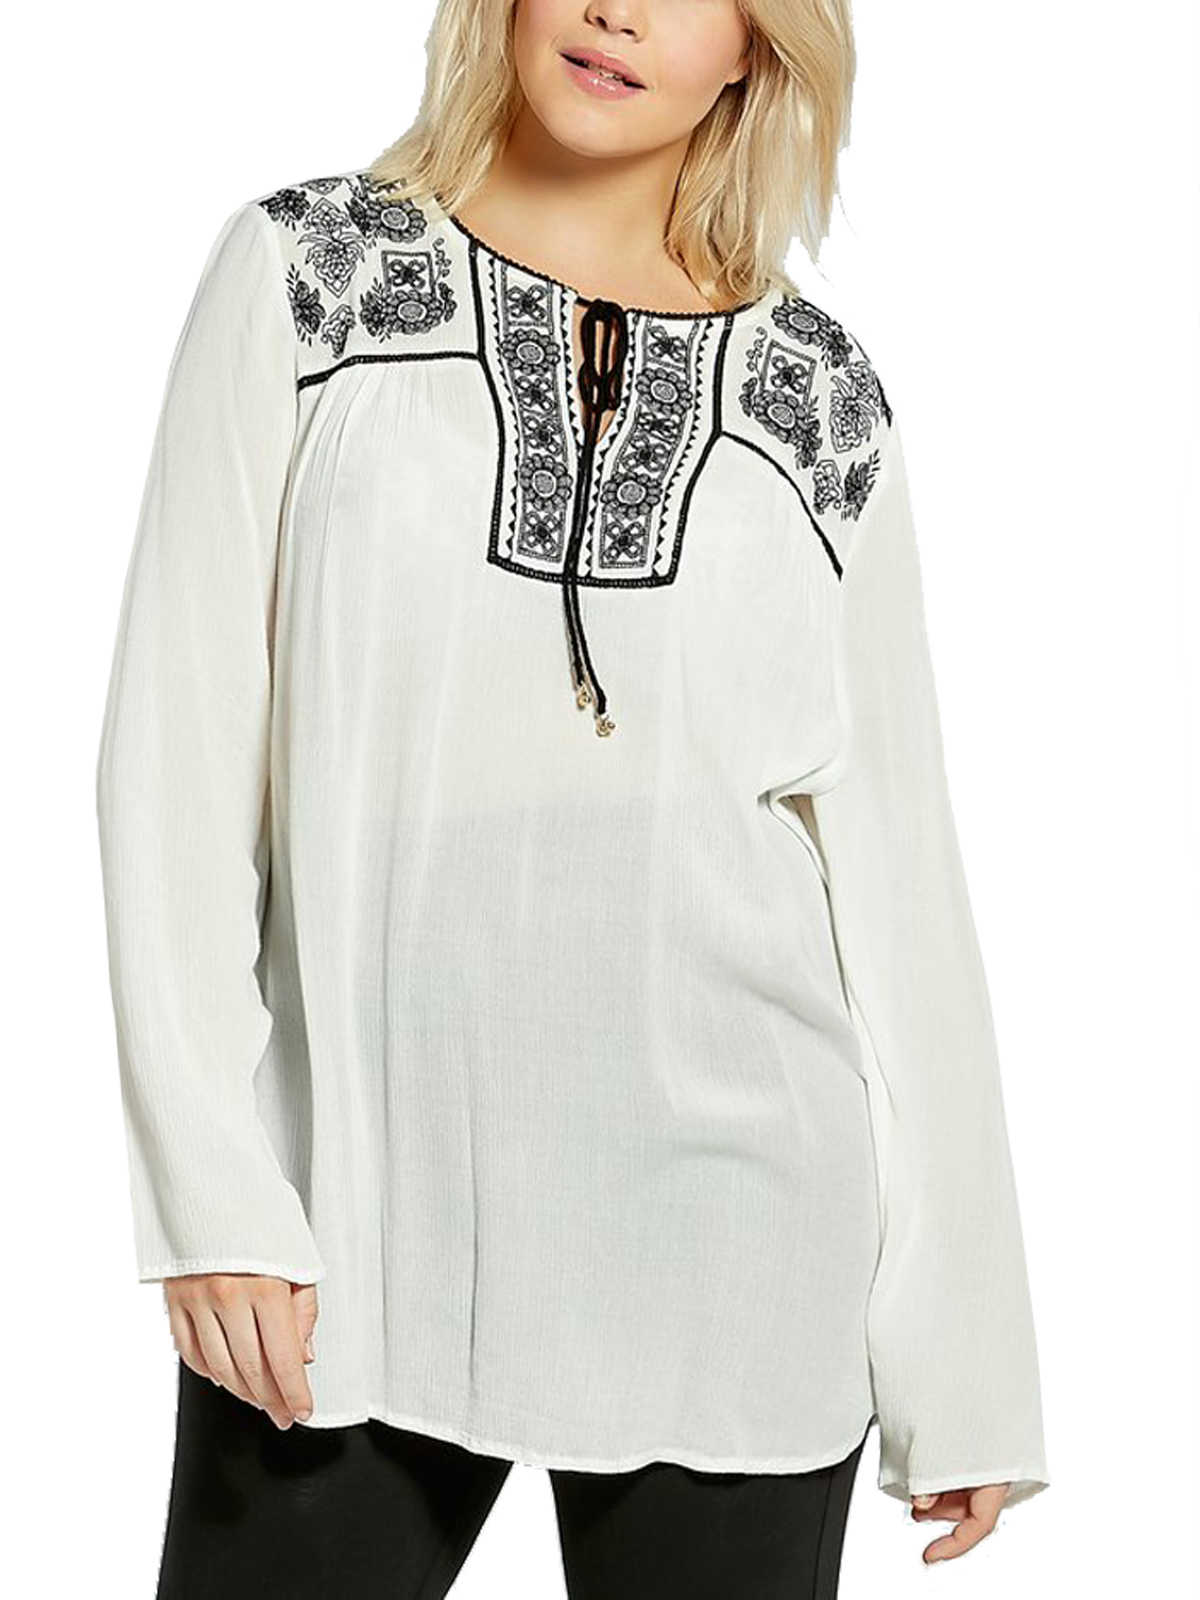 M&Co - - M&C0 IVORY Plus Floral Embroidered Peasant Top - Plus Size 26 ...